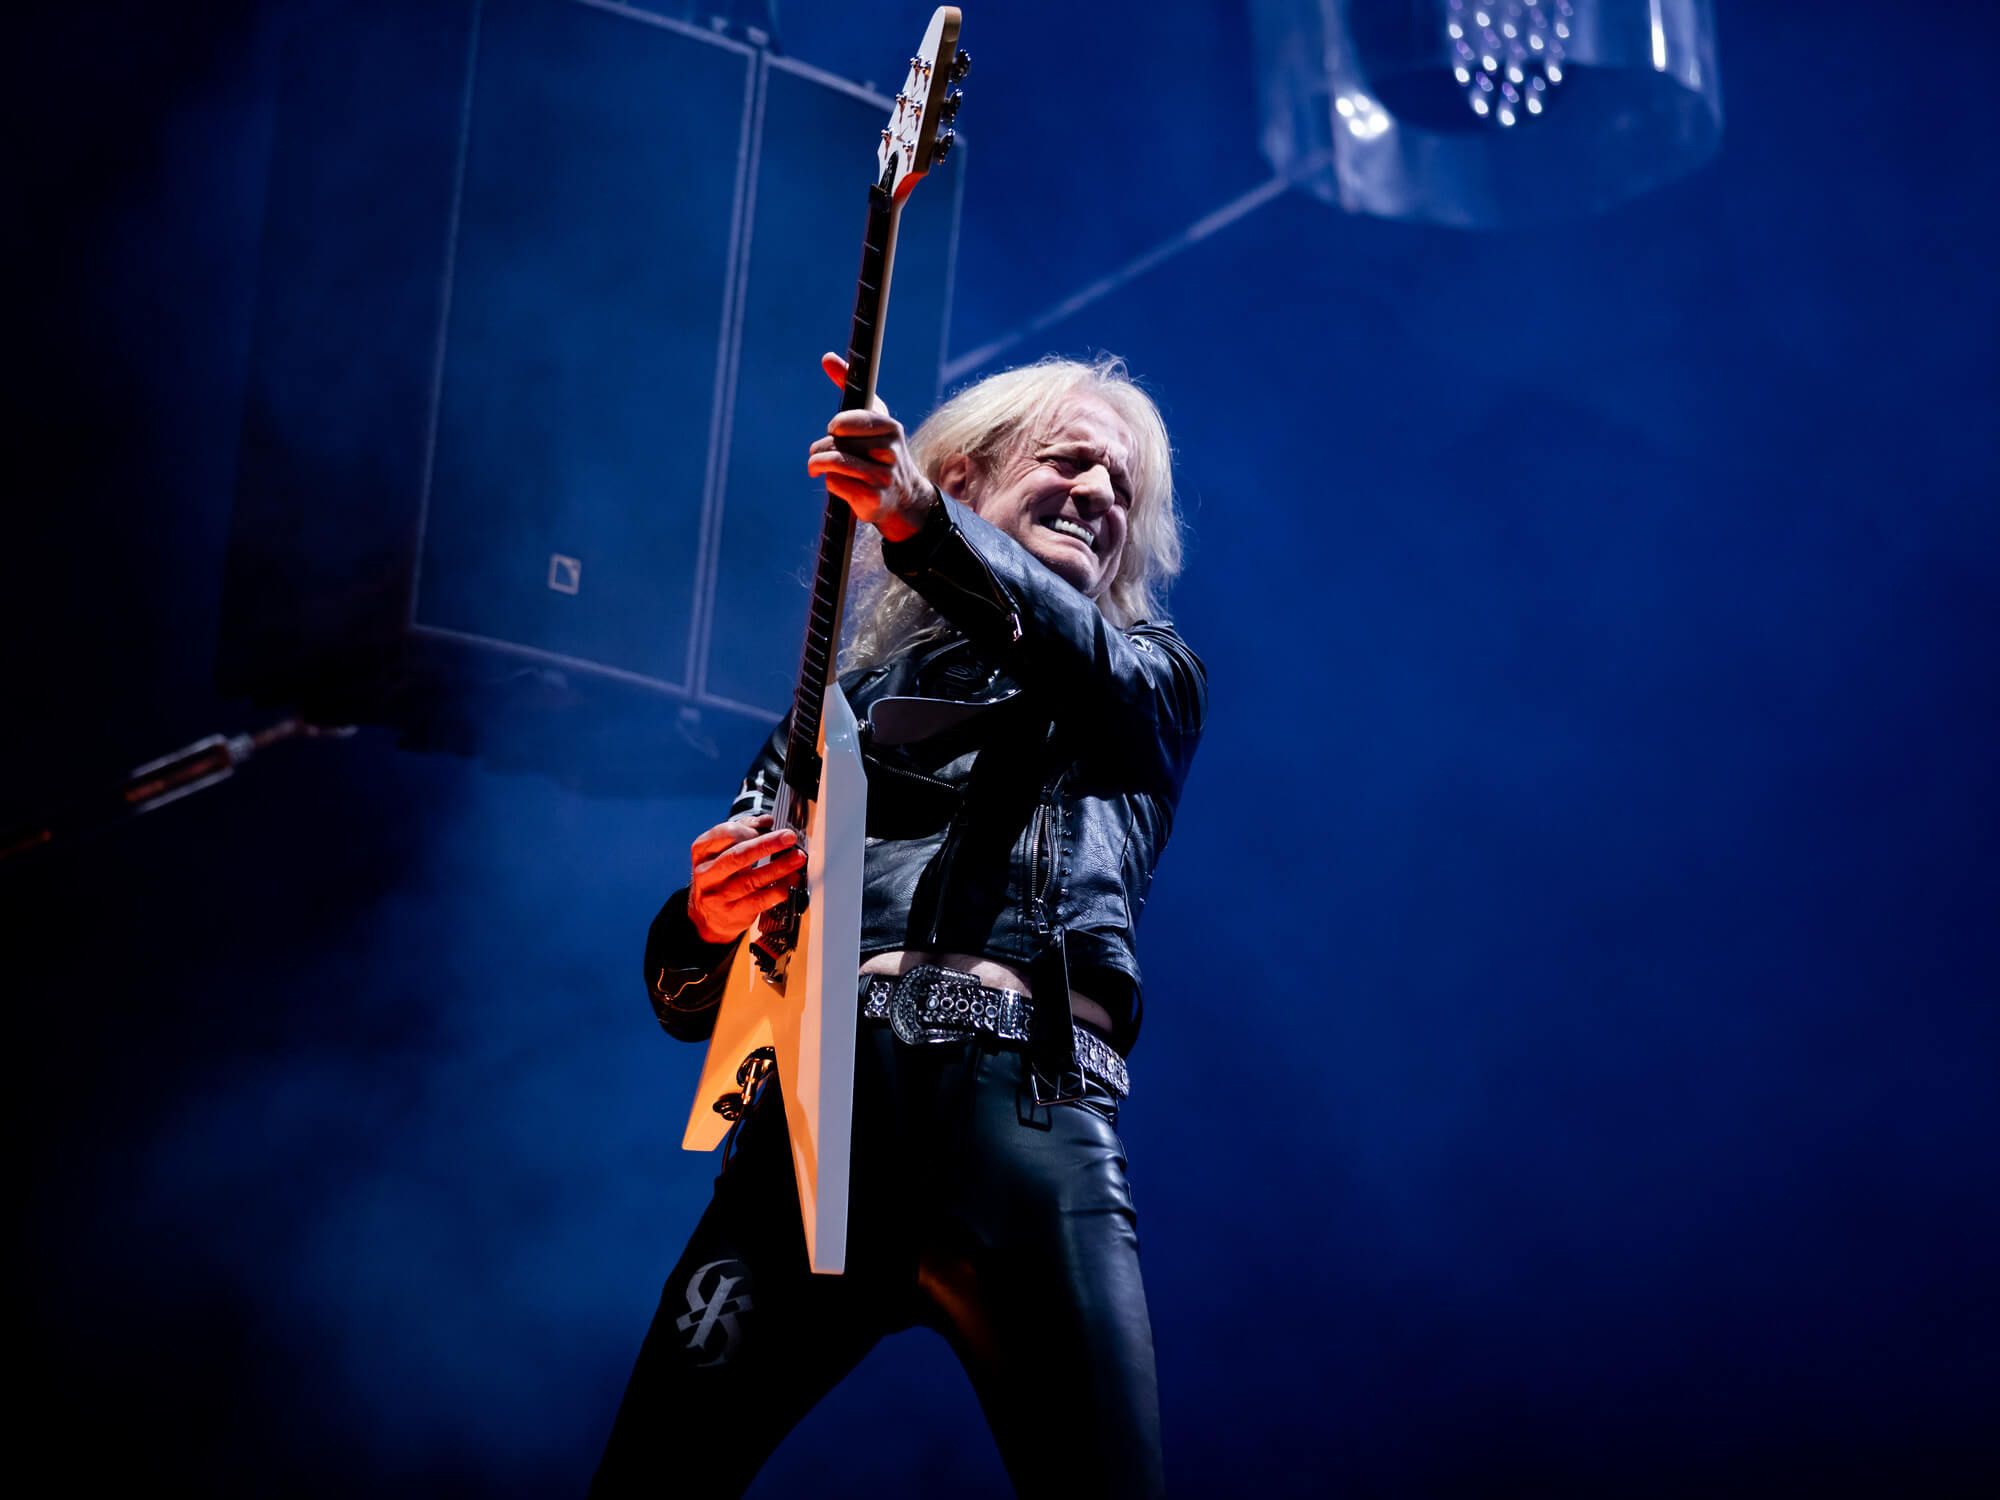 KK Downing performing on stage